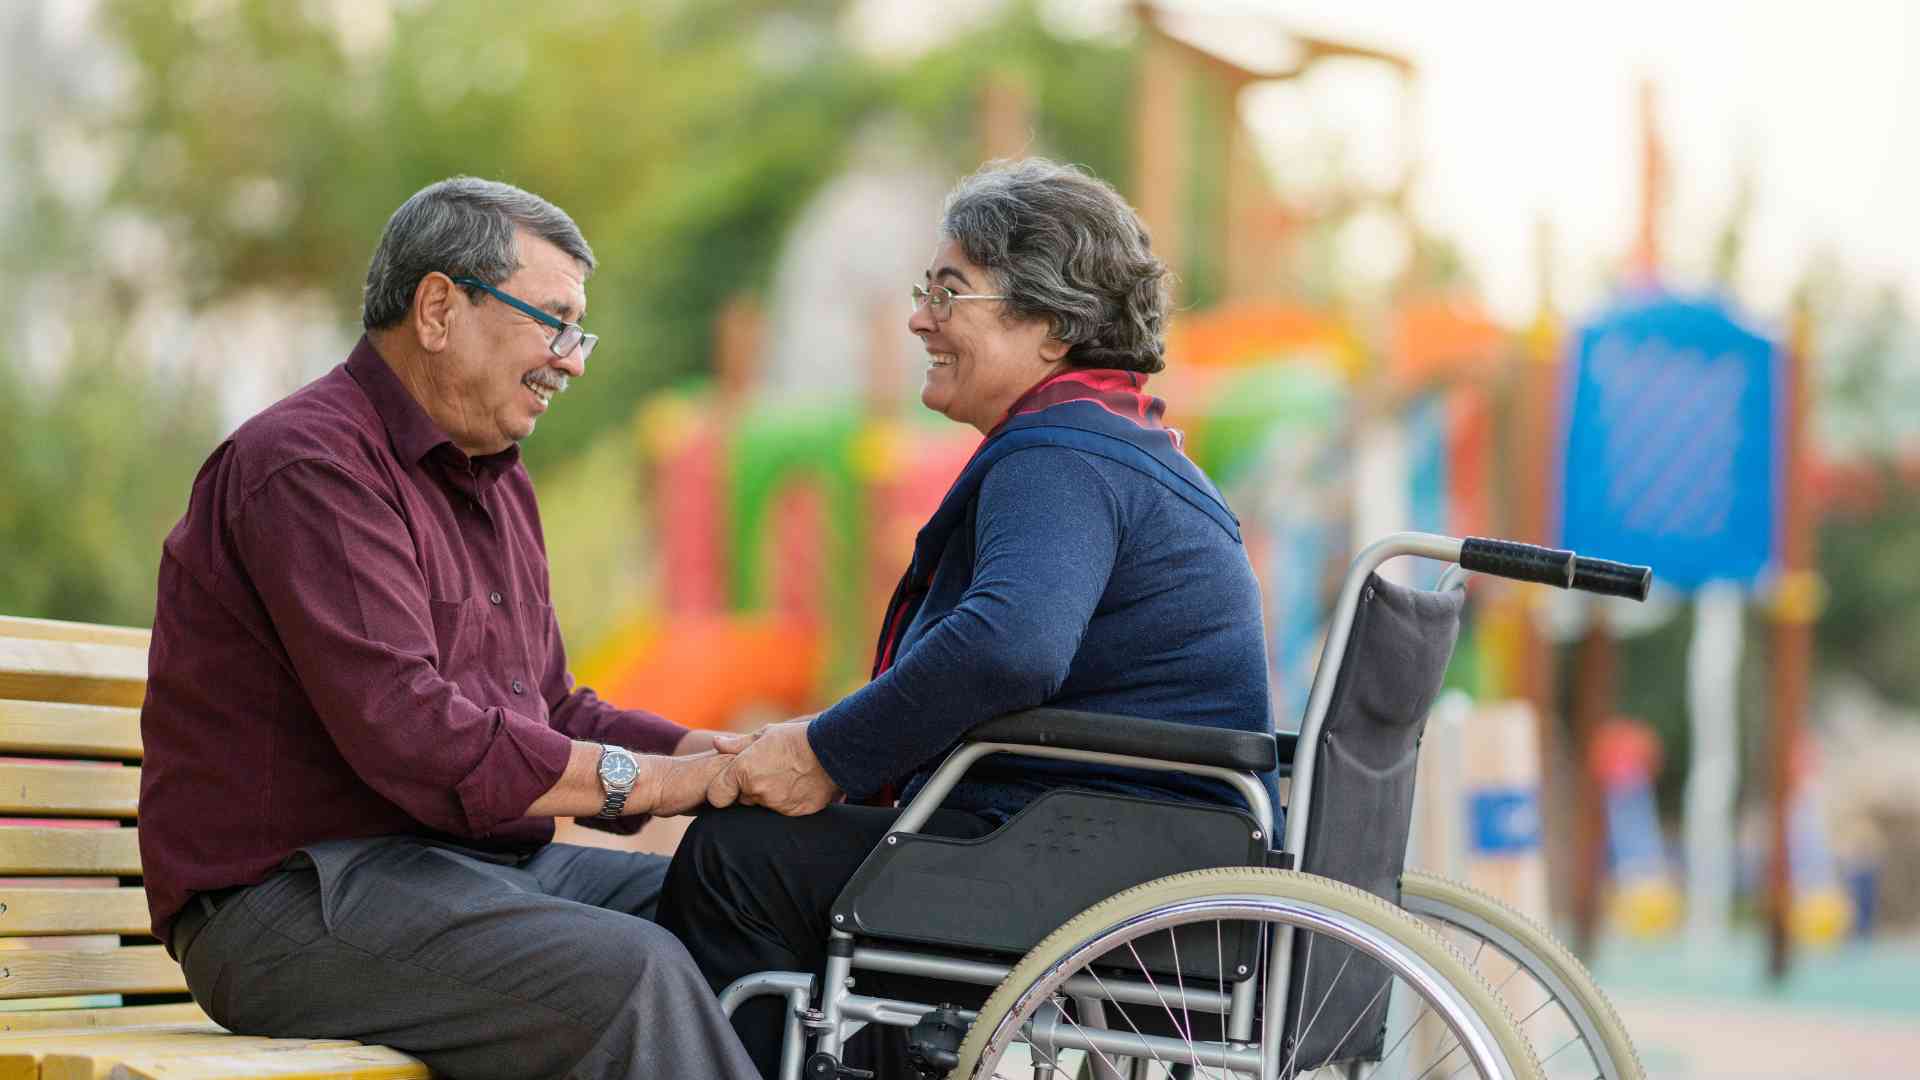 Seniors and people on disability benefits (SSDI) will soon get a payment